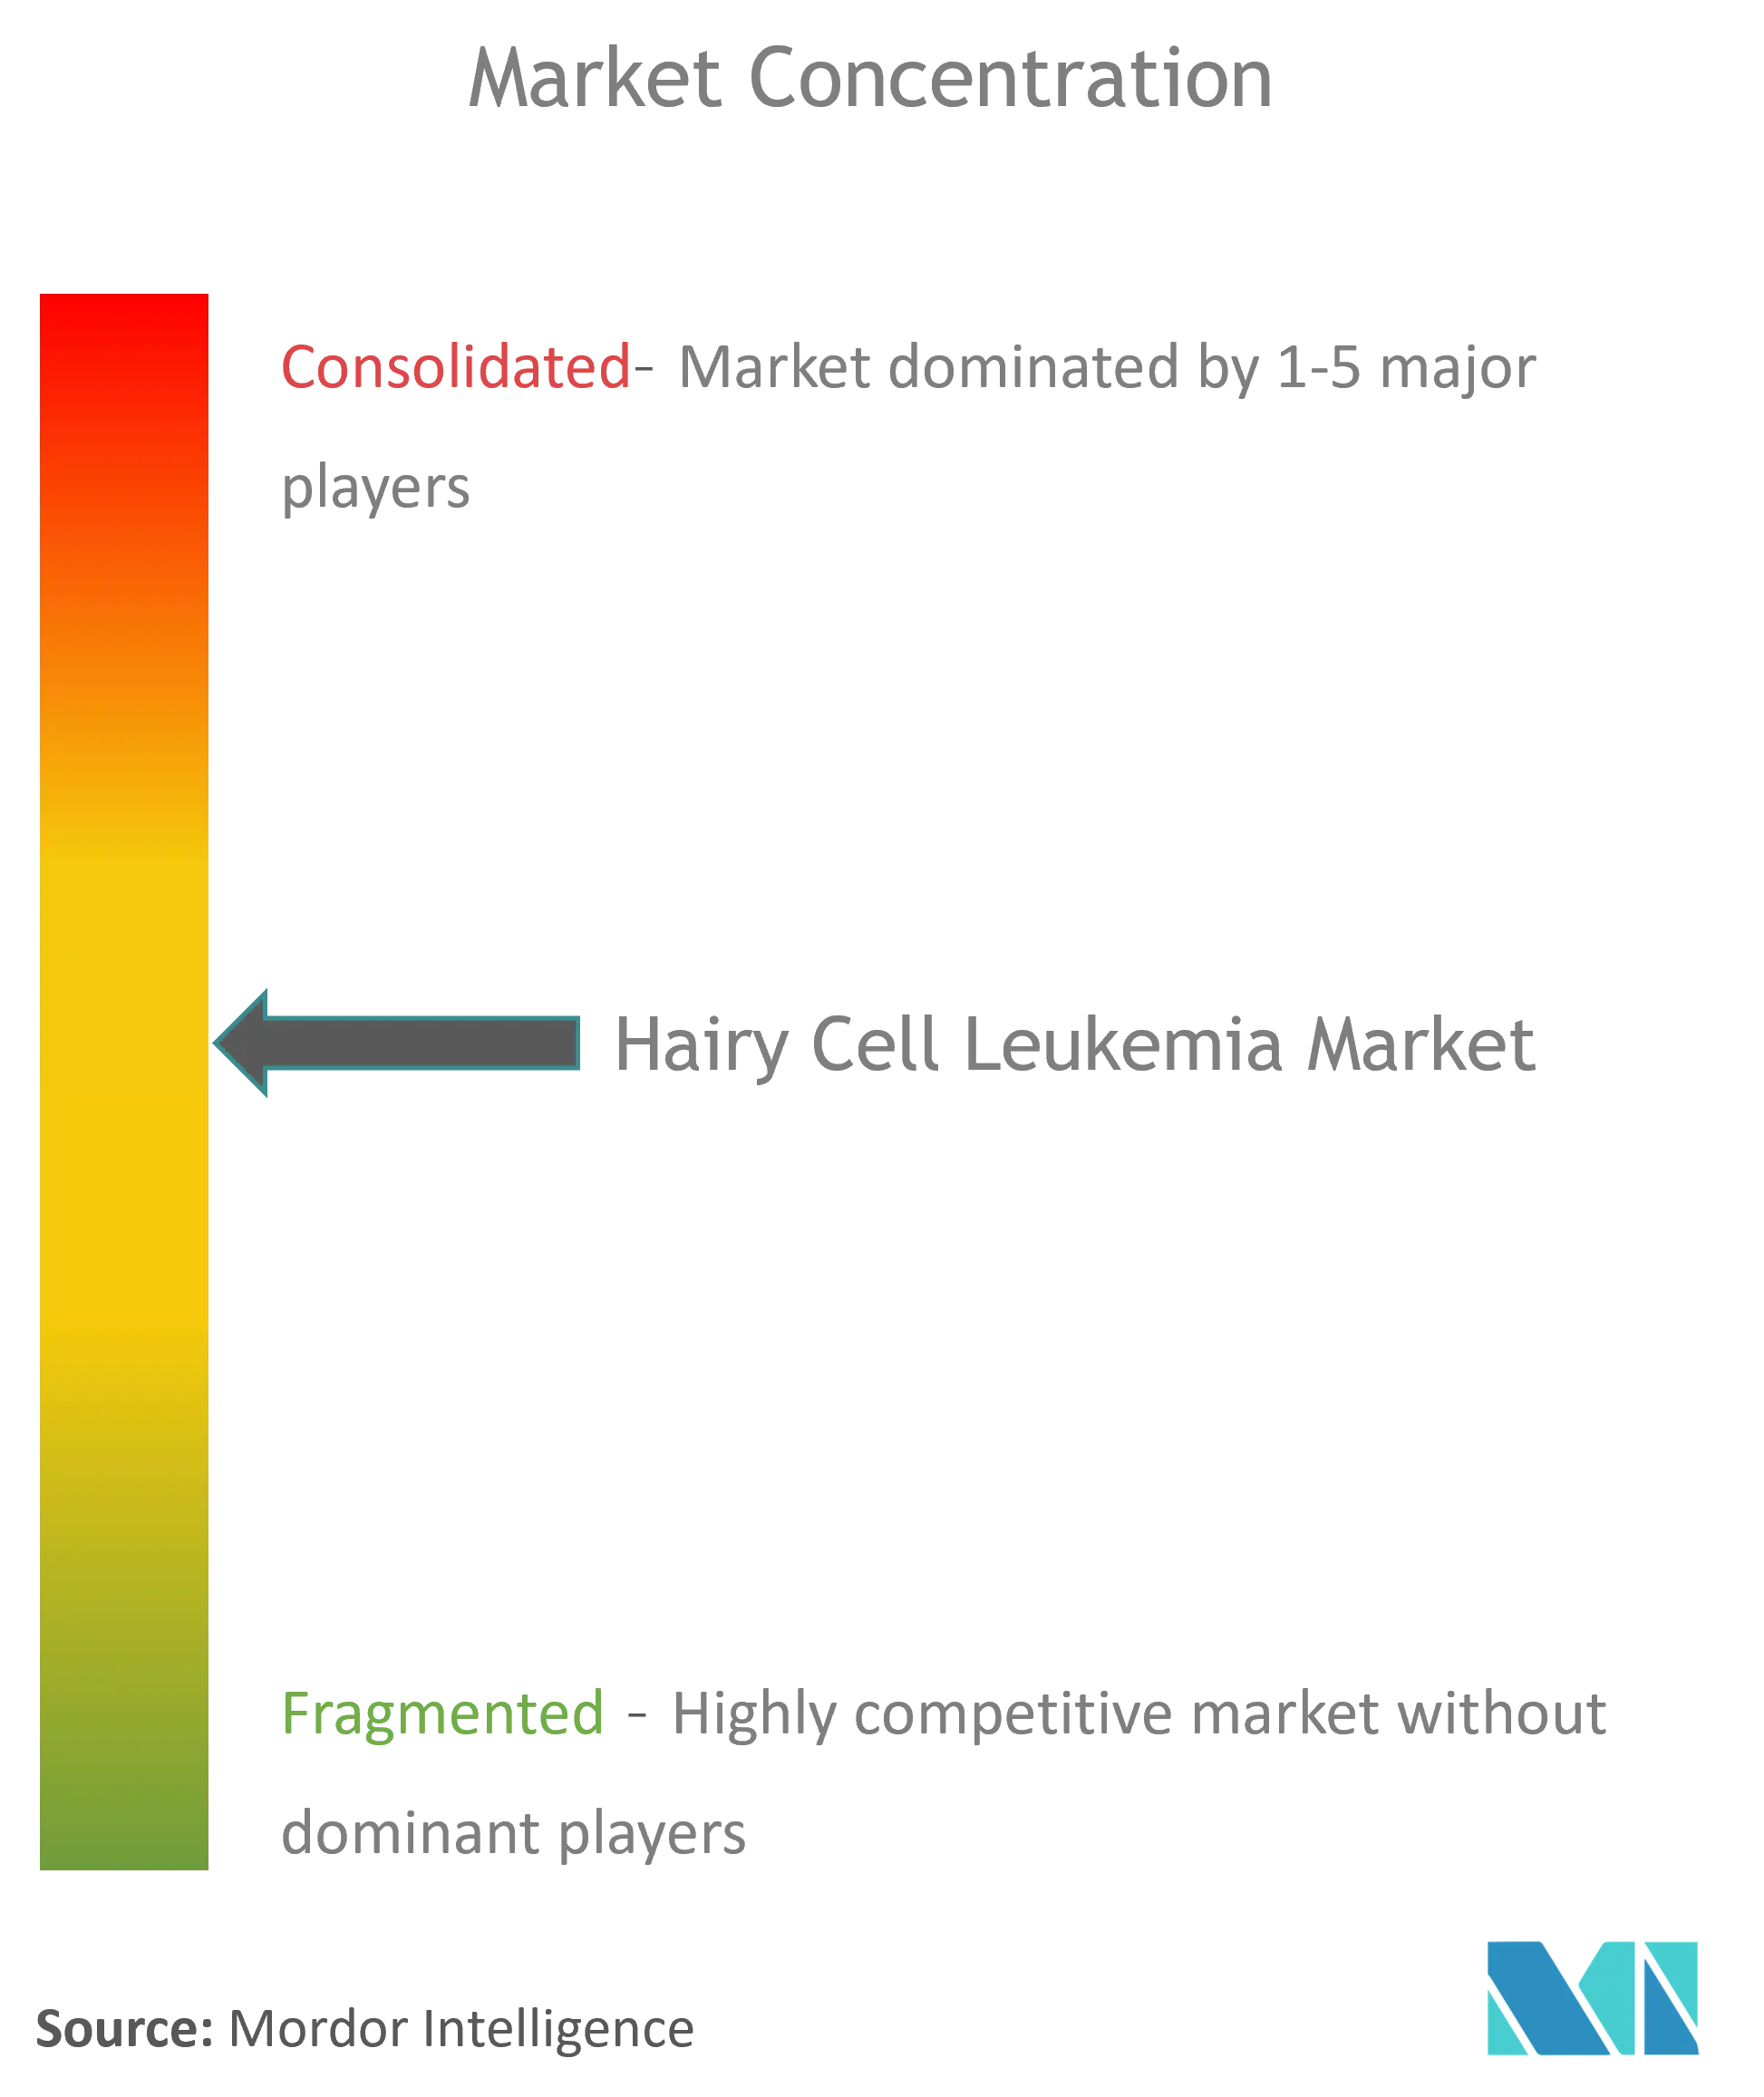 Hairy Cell Leukemia Market Concentration